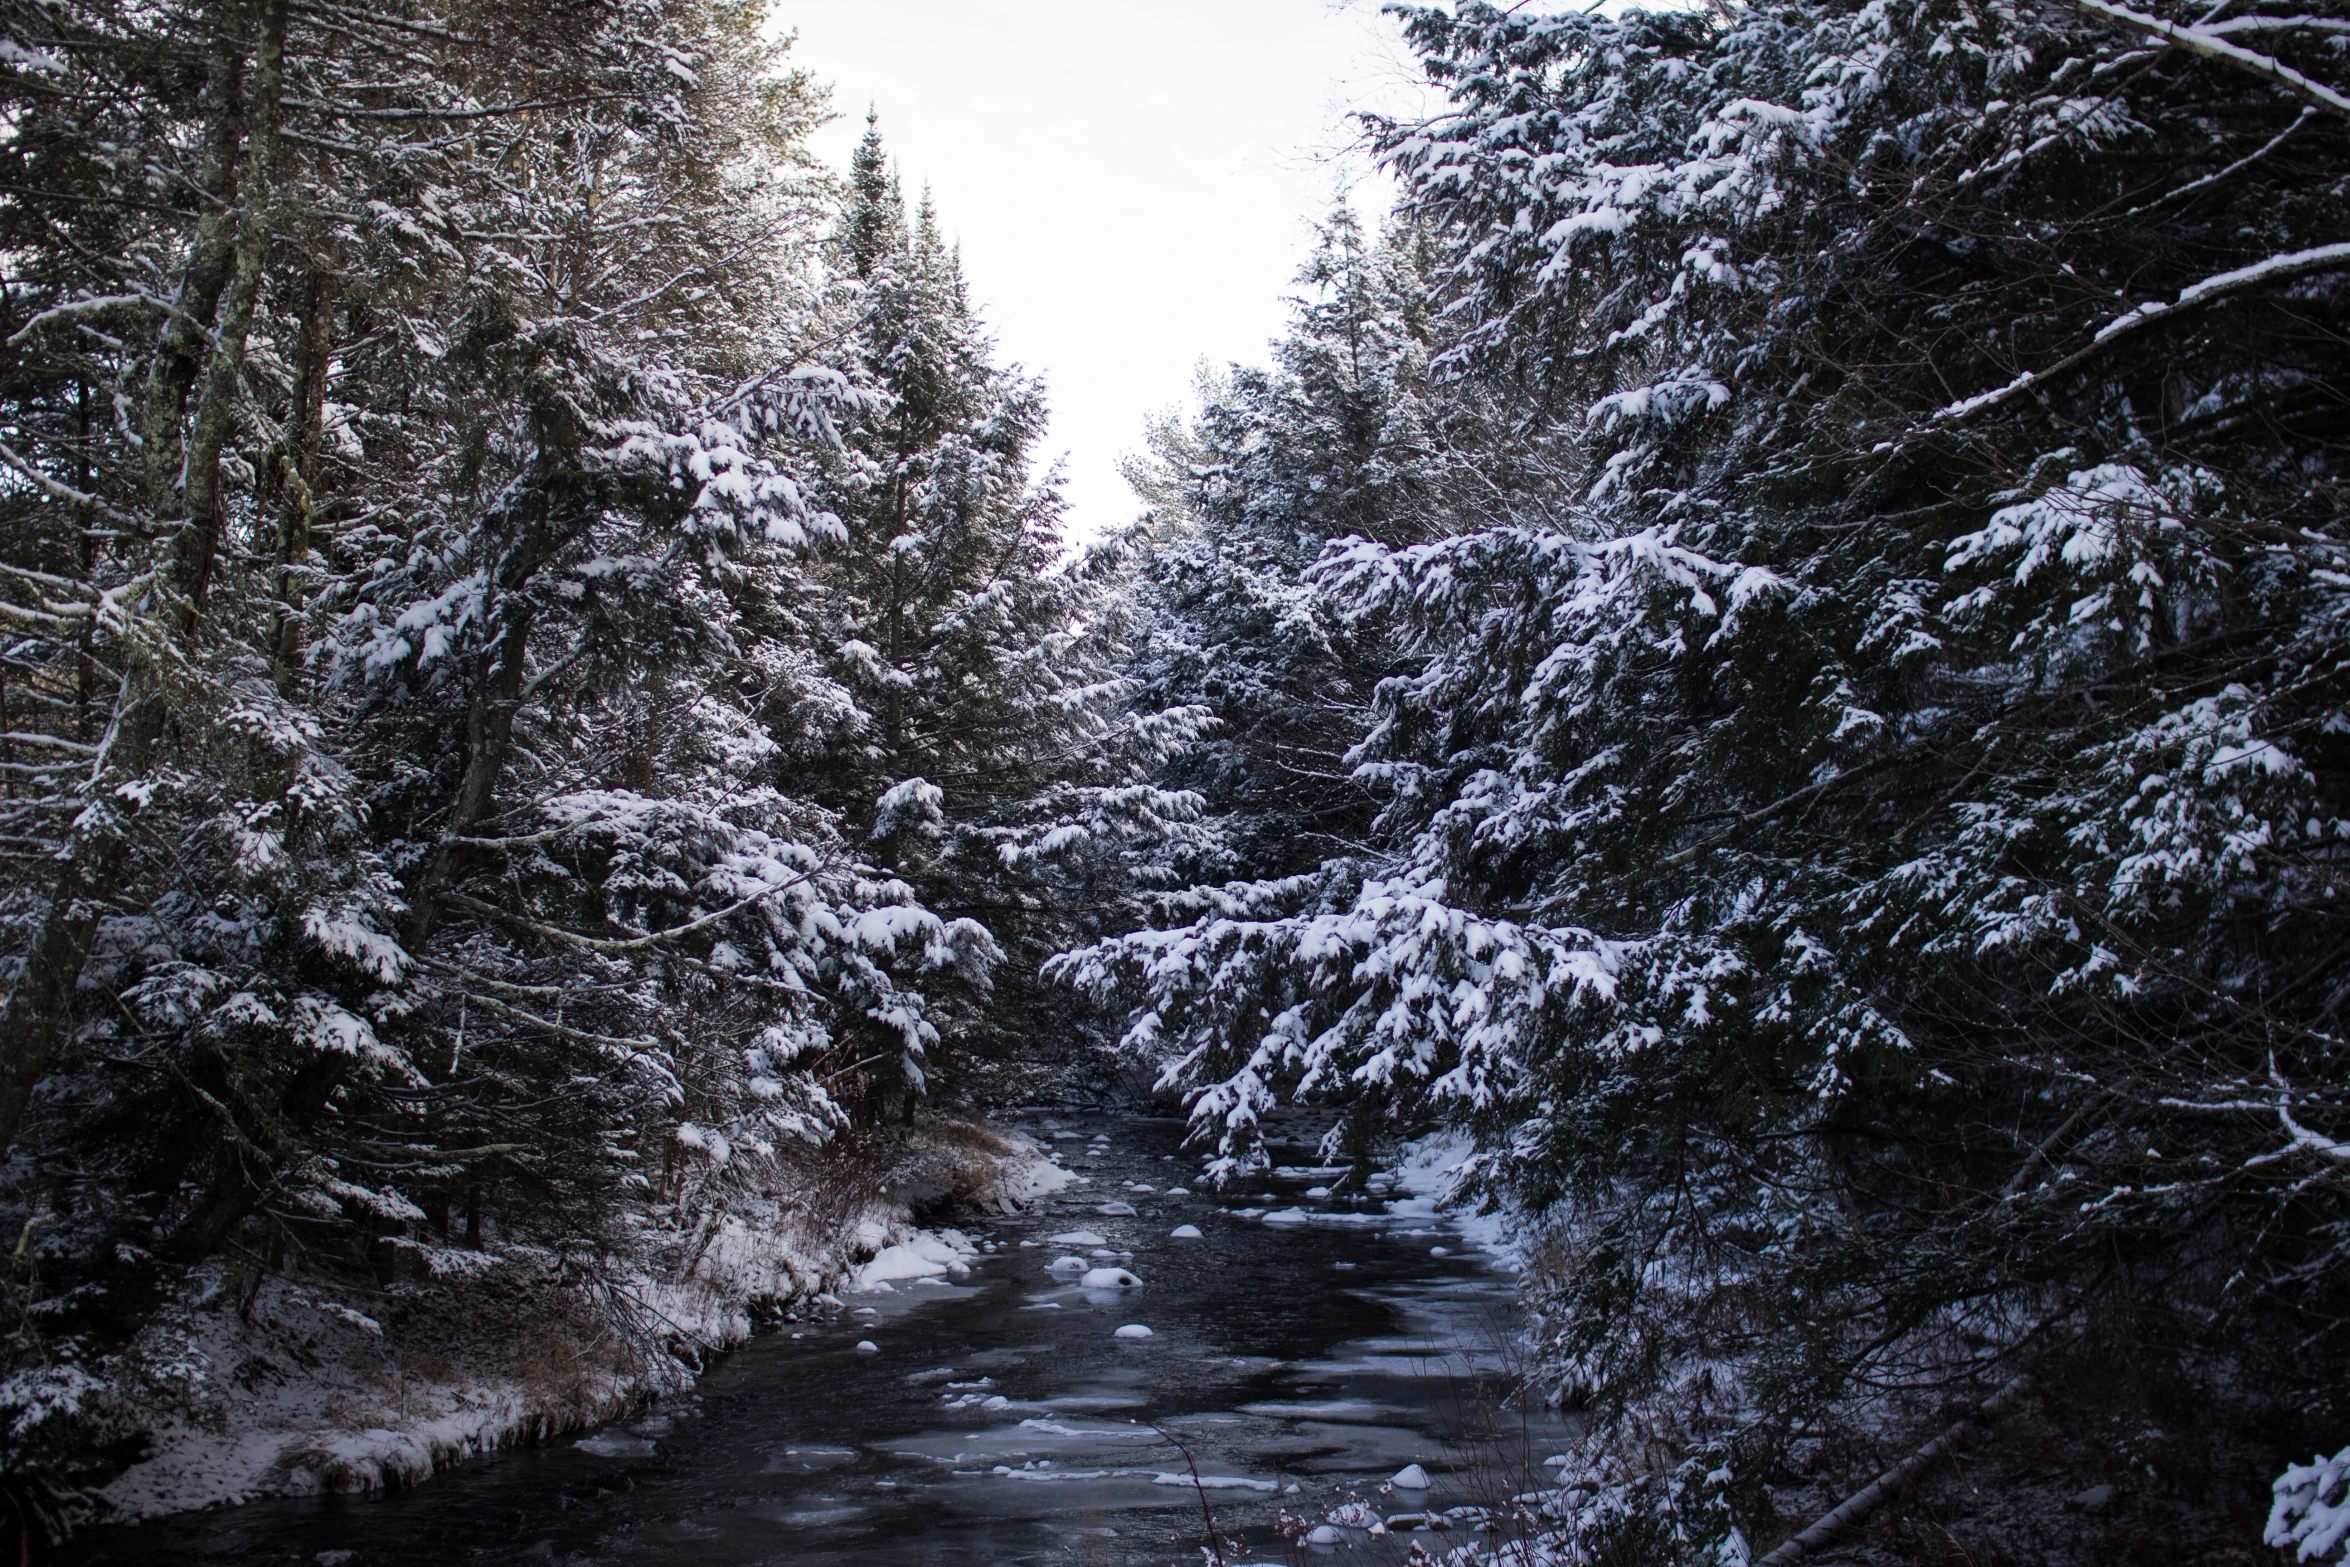 there is a river that runs between snow - covered trees